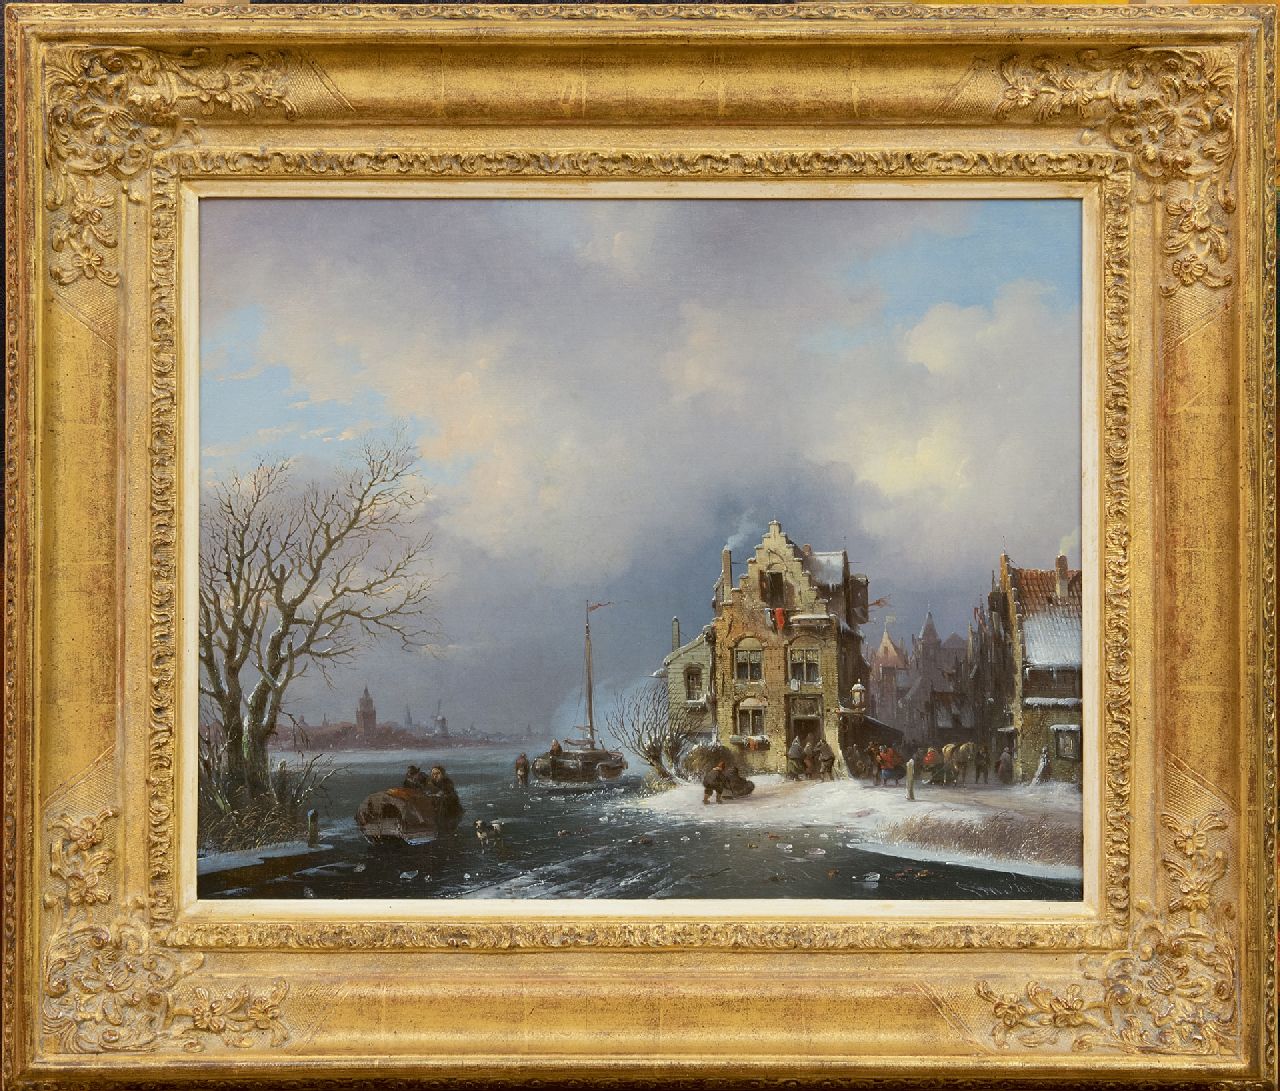 Stok J. van der | Jacobus van der Stok | Paintings offered for sale | A busy day in an town on a frozen river, oil on canvas 40.8 x 50.6 cm, signed l.r. and dated '59